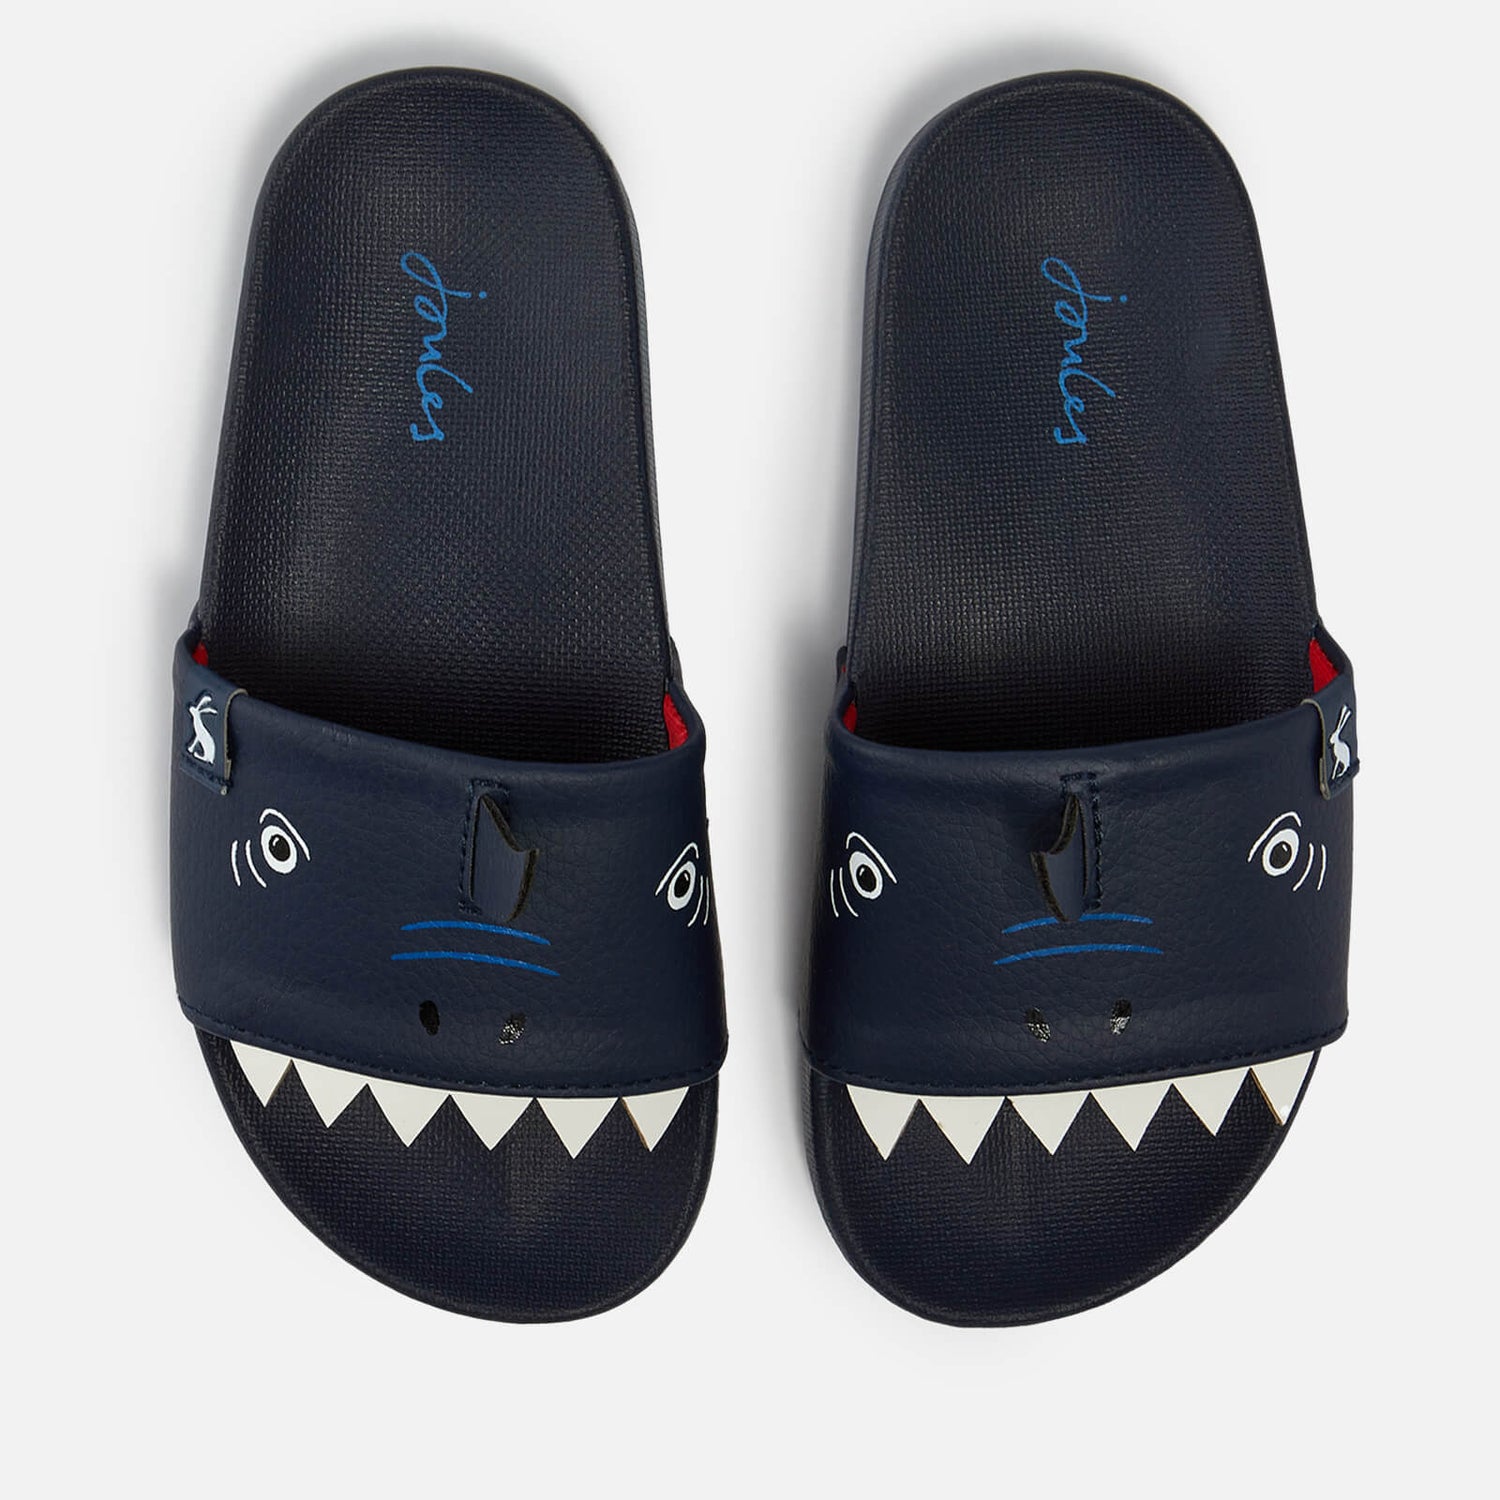 Joules Kids' Shark Printed Faux Leather Sliders